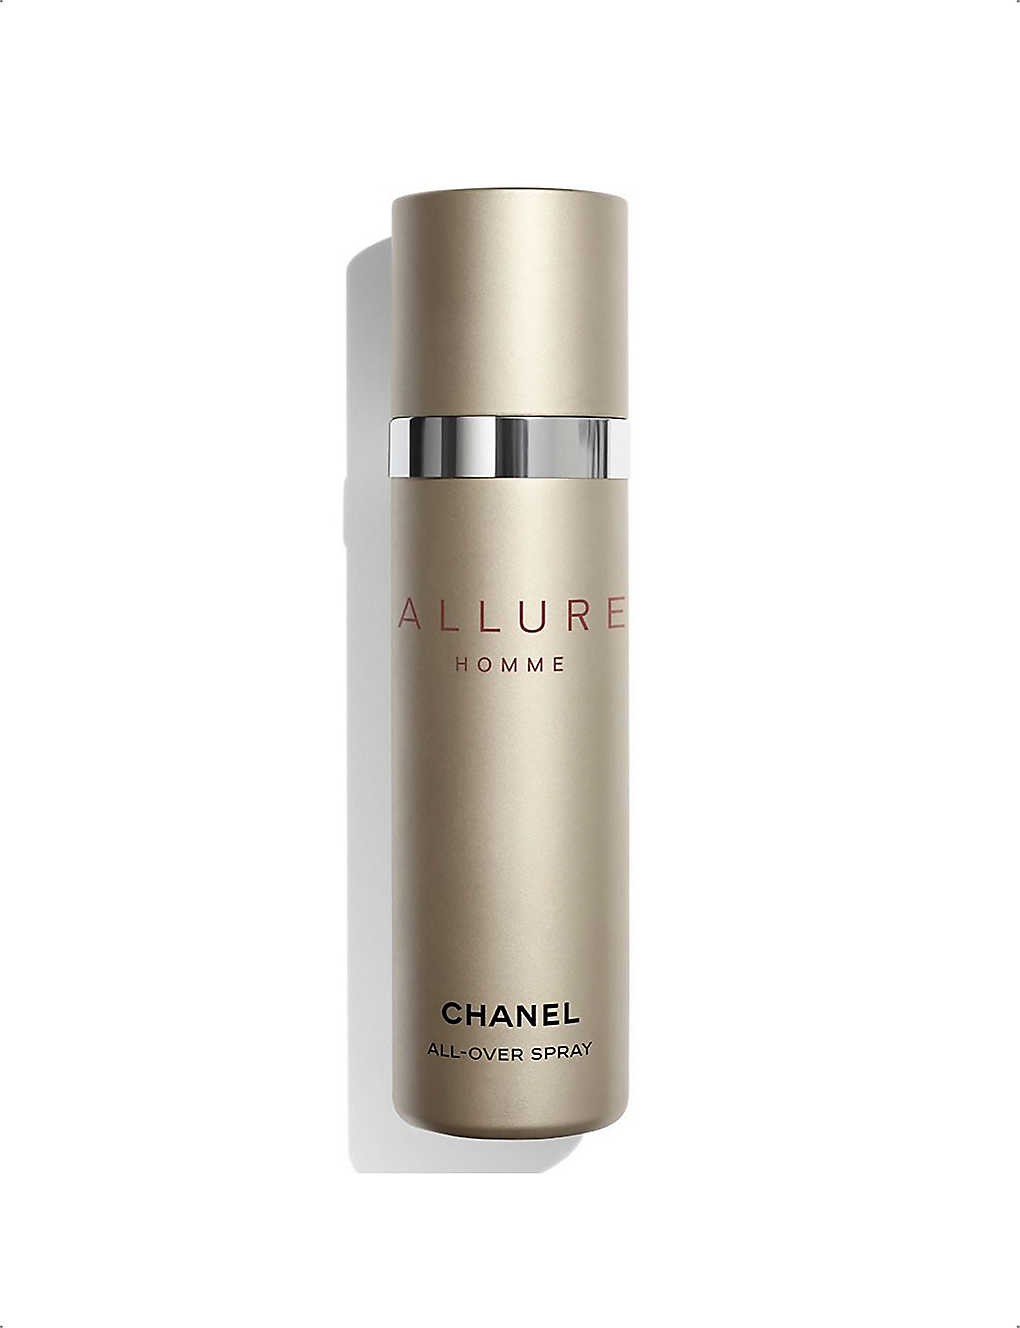 CHANEL - ALLURE HOMME All-Over Spray 100ml